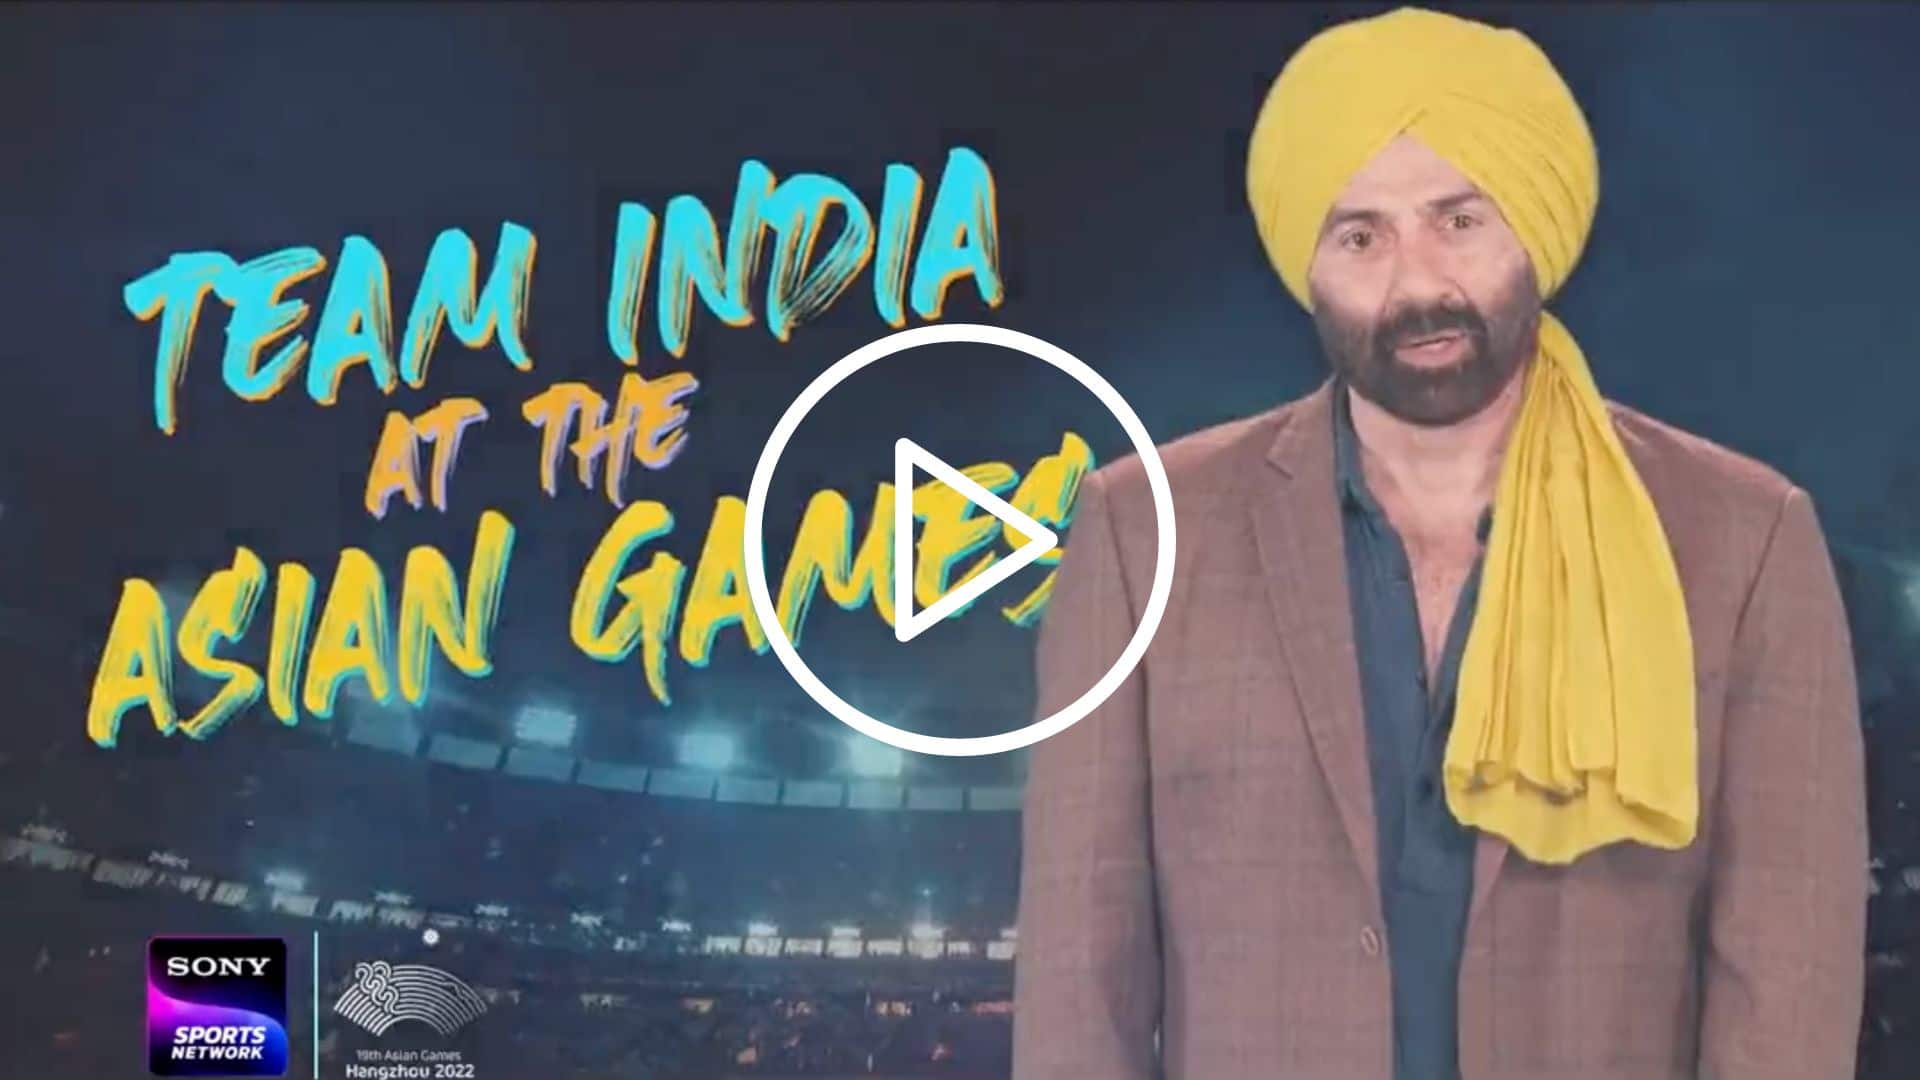 [Watch] Broadcasters Release Blockbuster Promo Featuring Sunny Deol For Asian Games